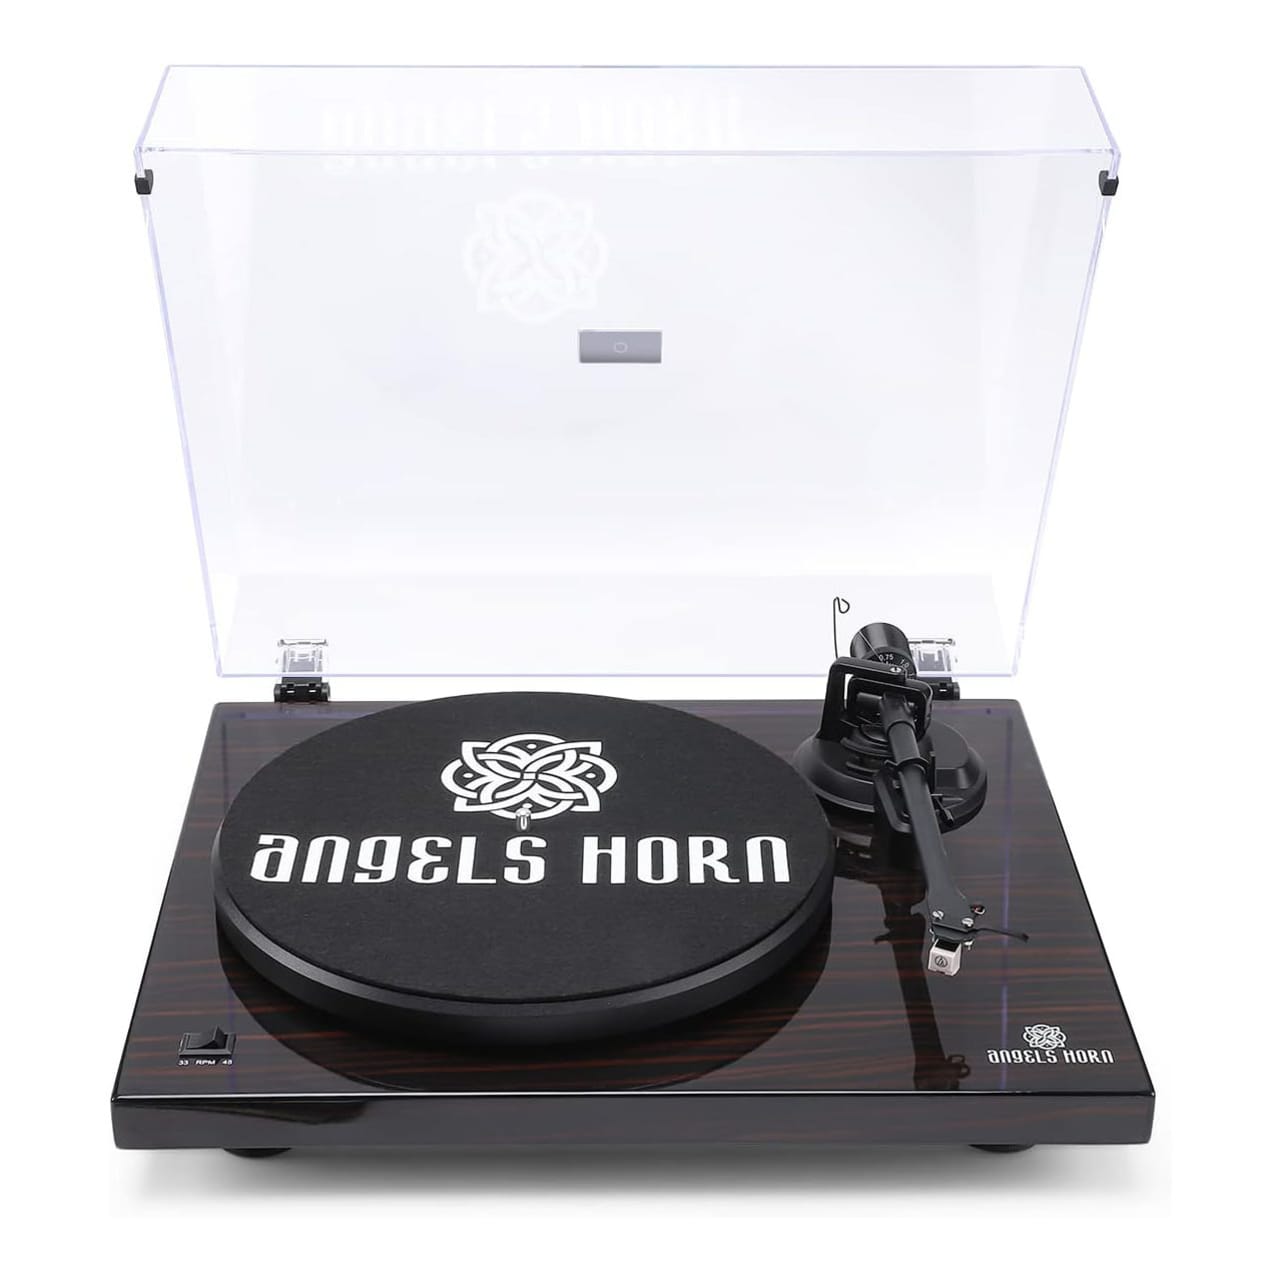 The Best Record Players for Listening to Your Favorite Albums - Buy Side  from WSJ